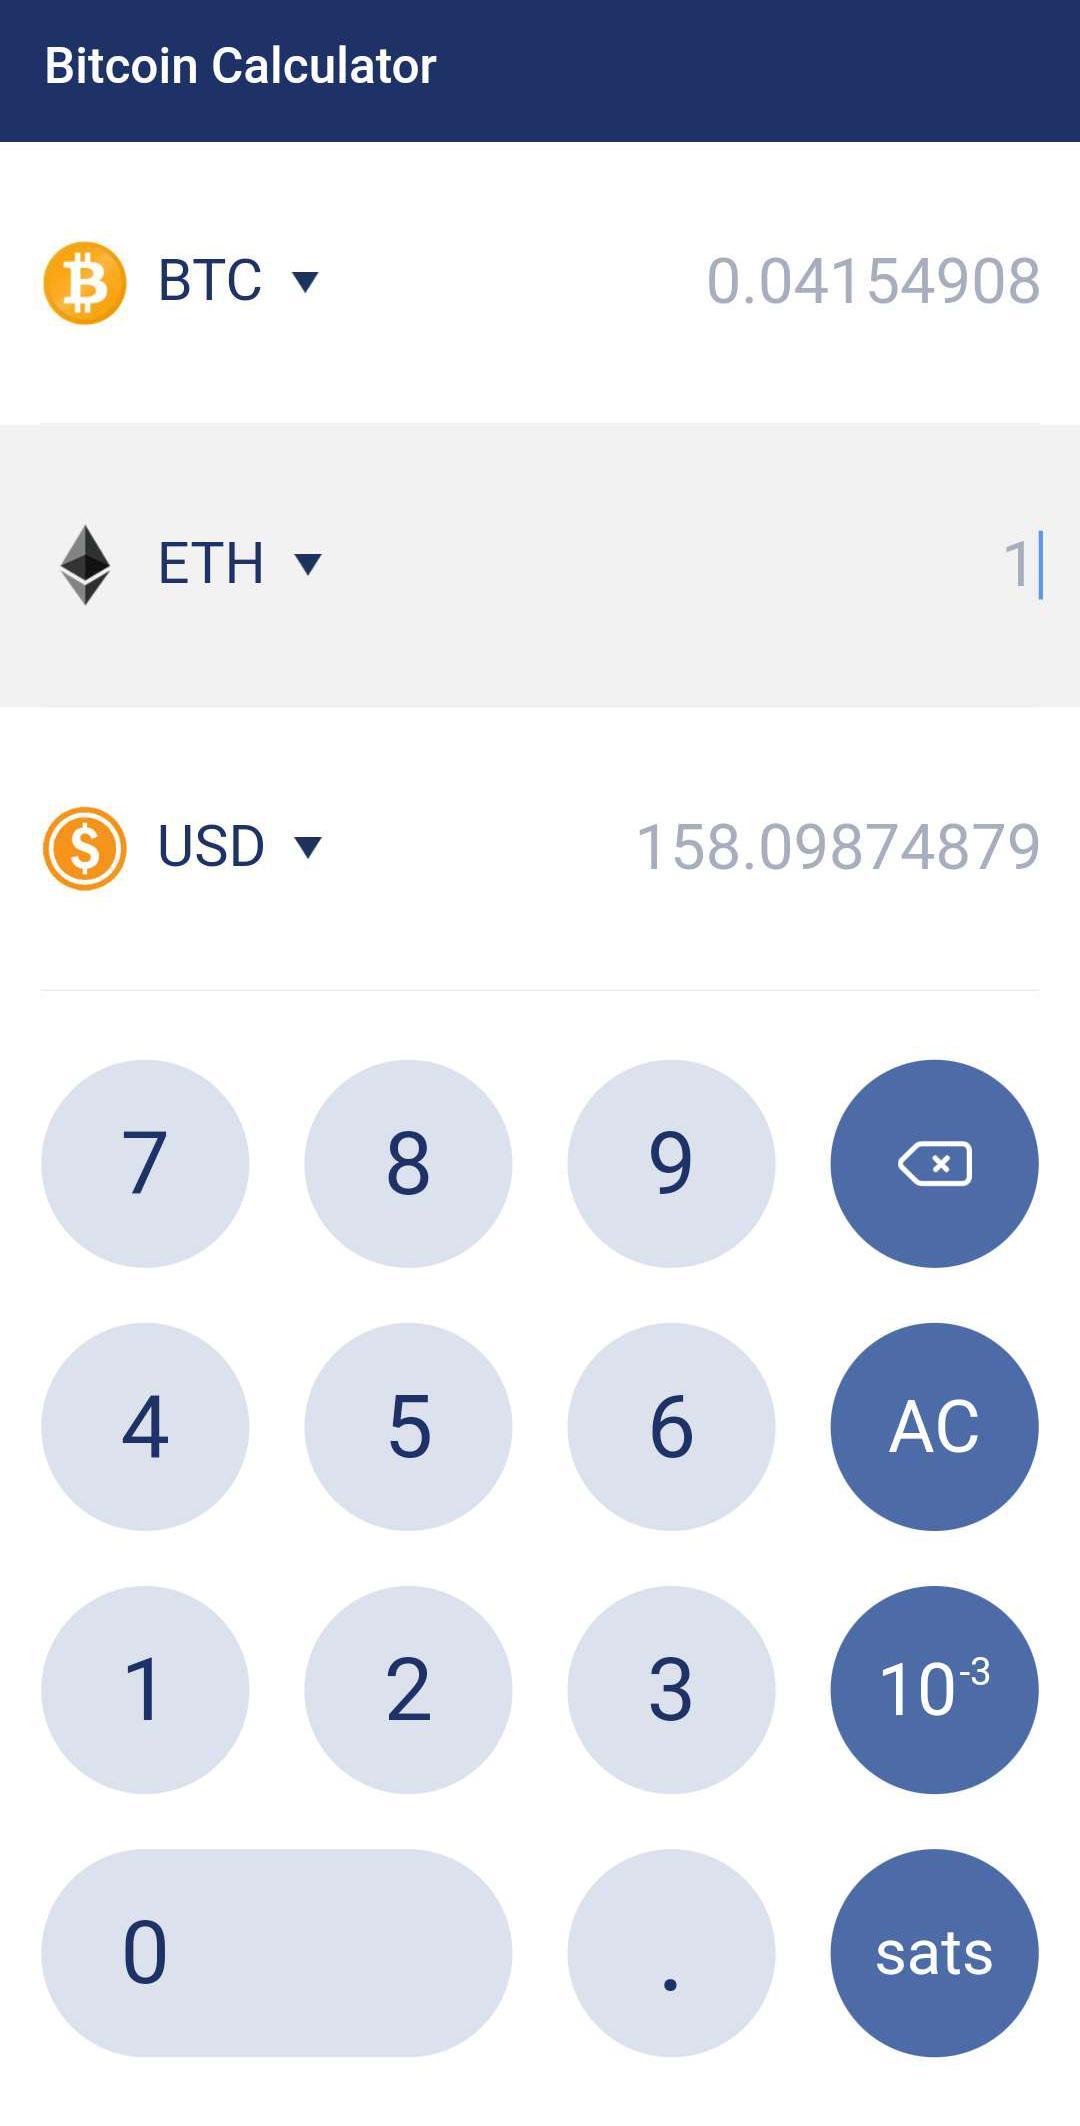 Bitcoin Calculator for Android - APK Download